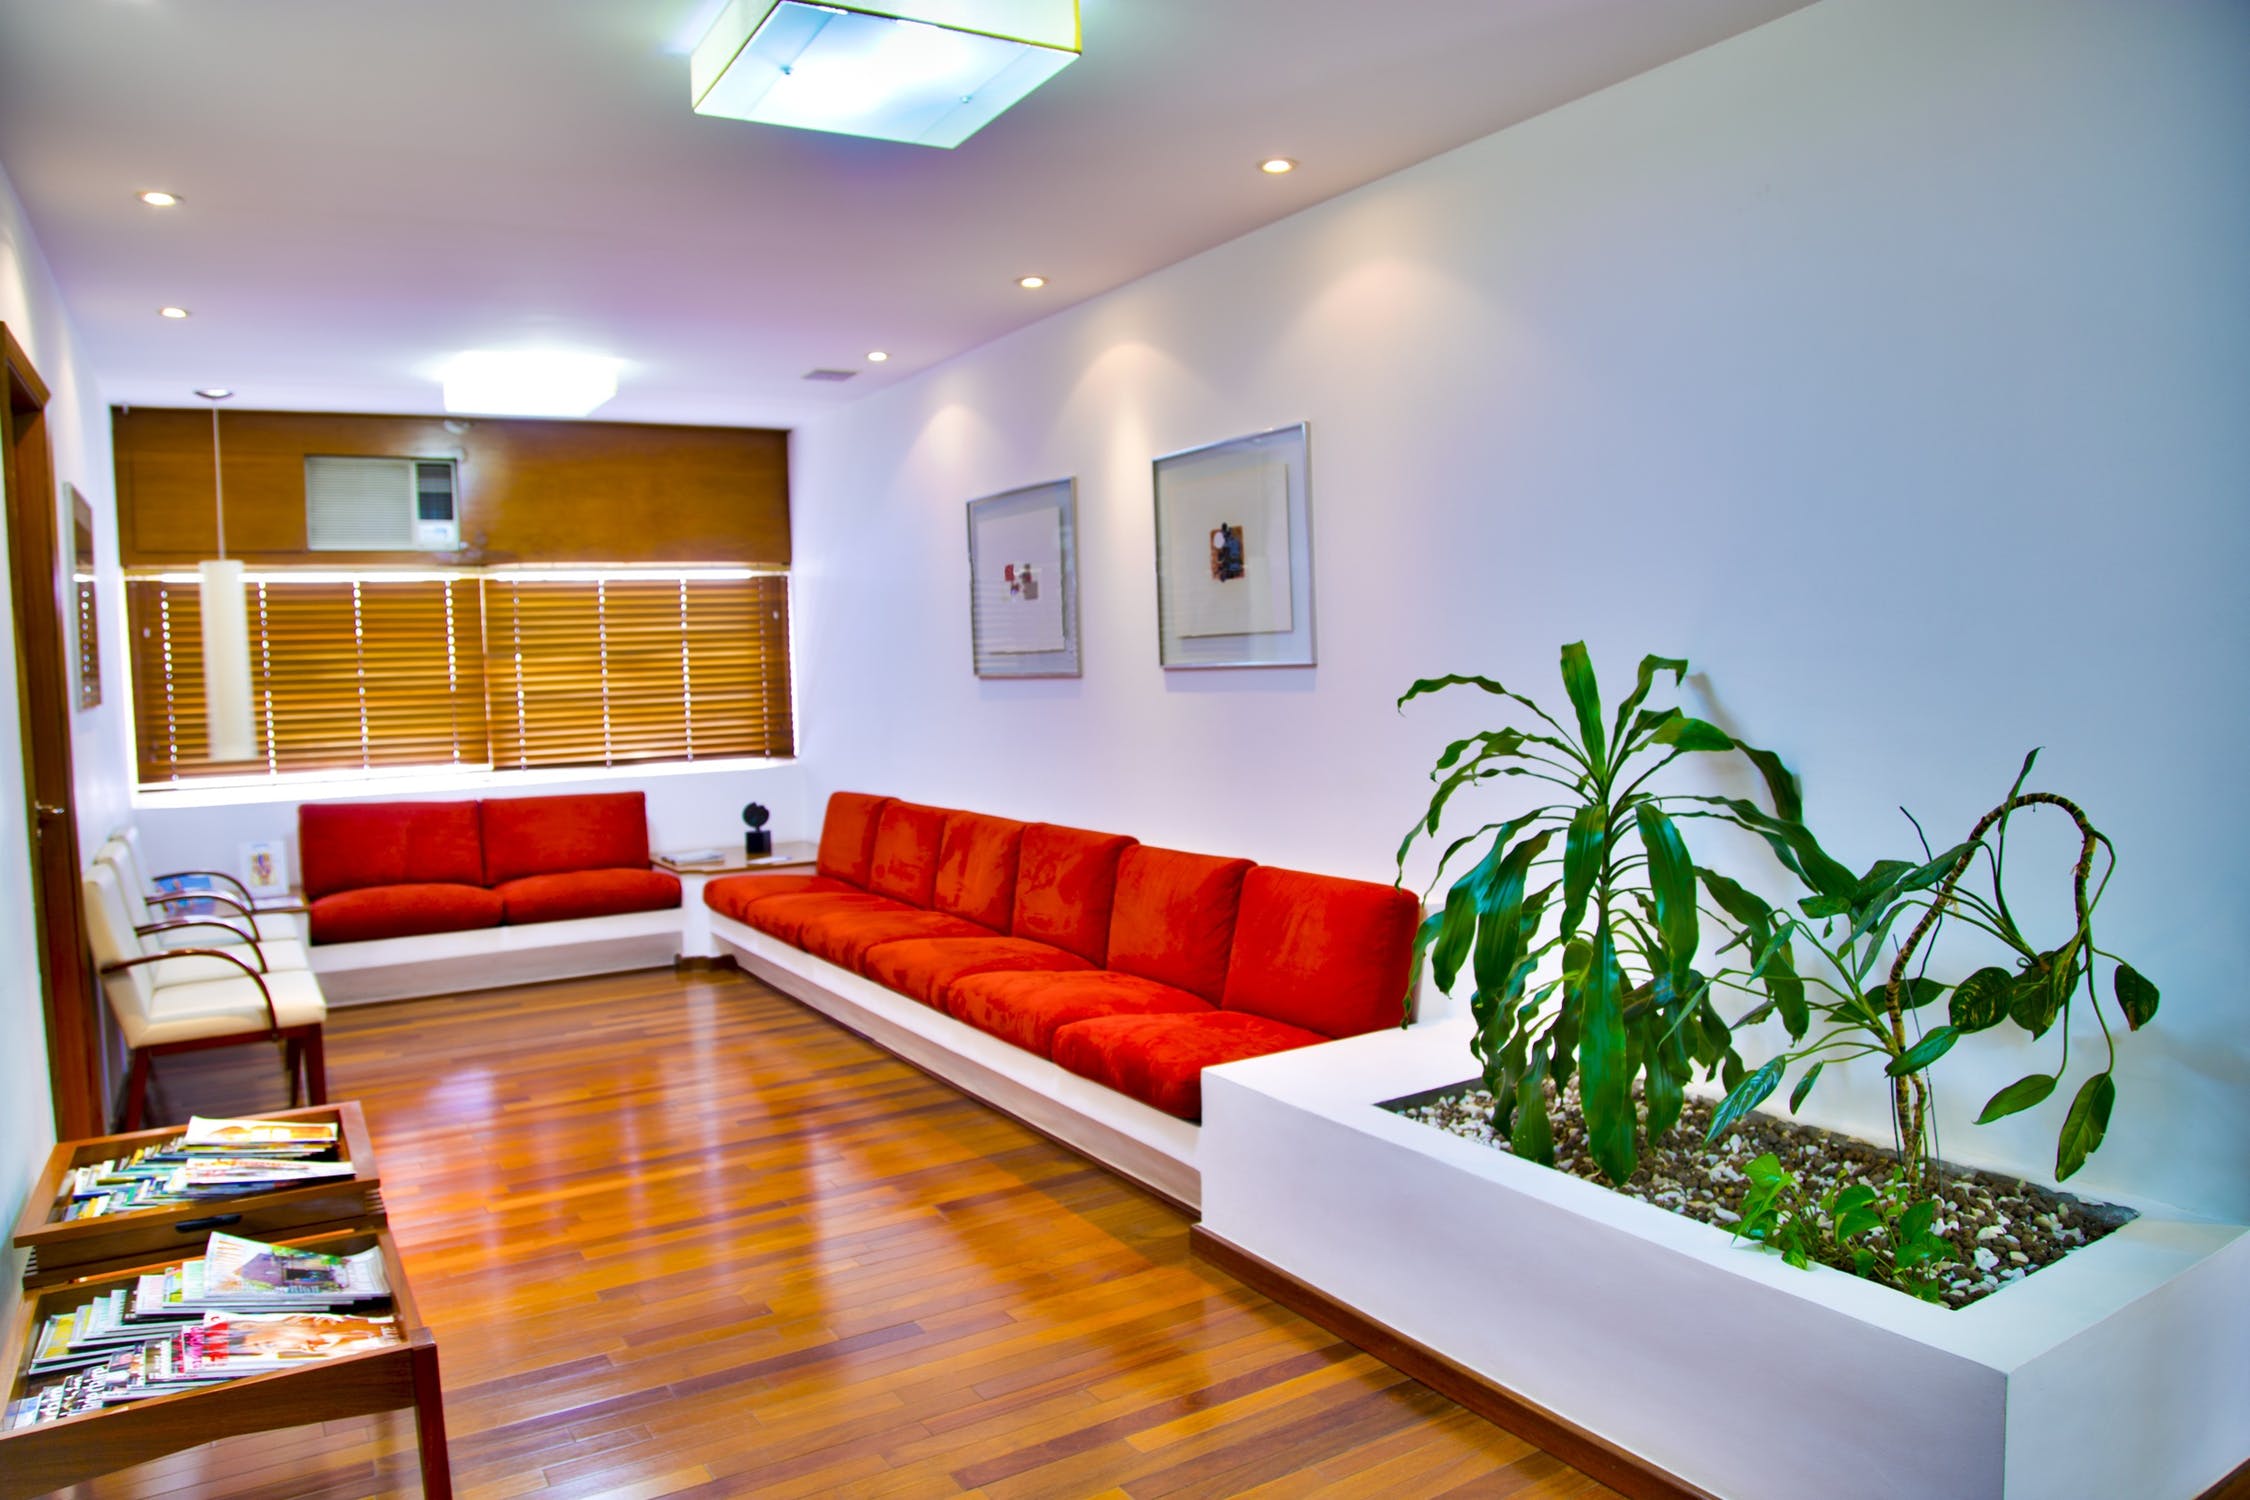 6 Benefits You Can Get From Using LED Lights in Your Home